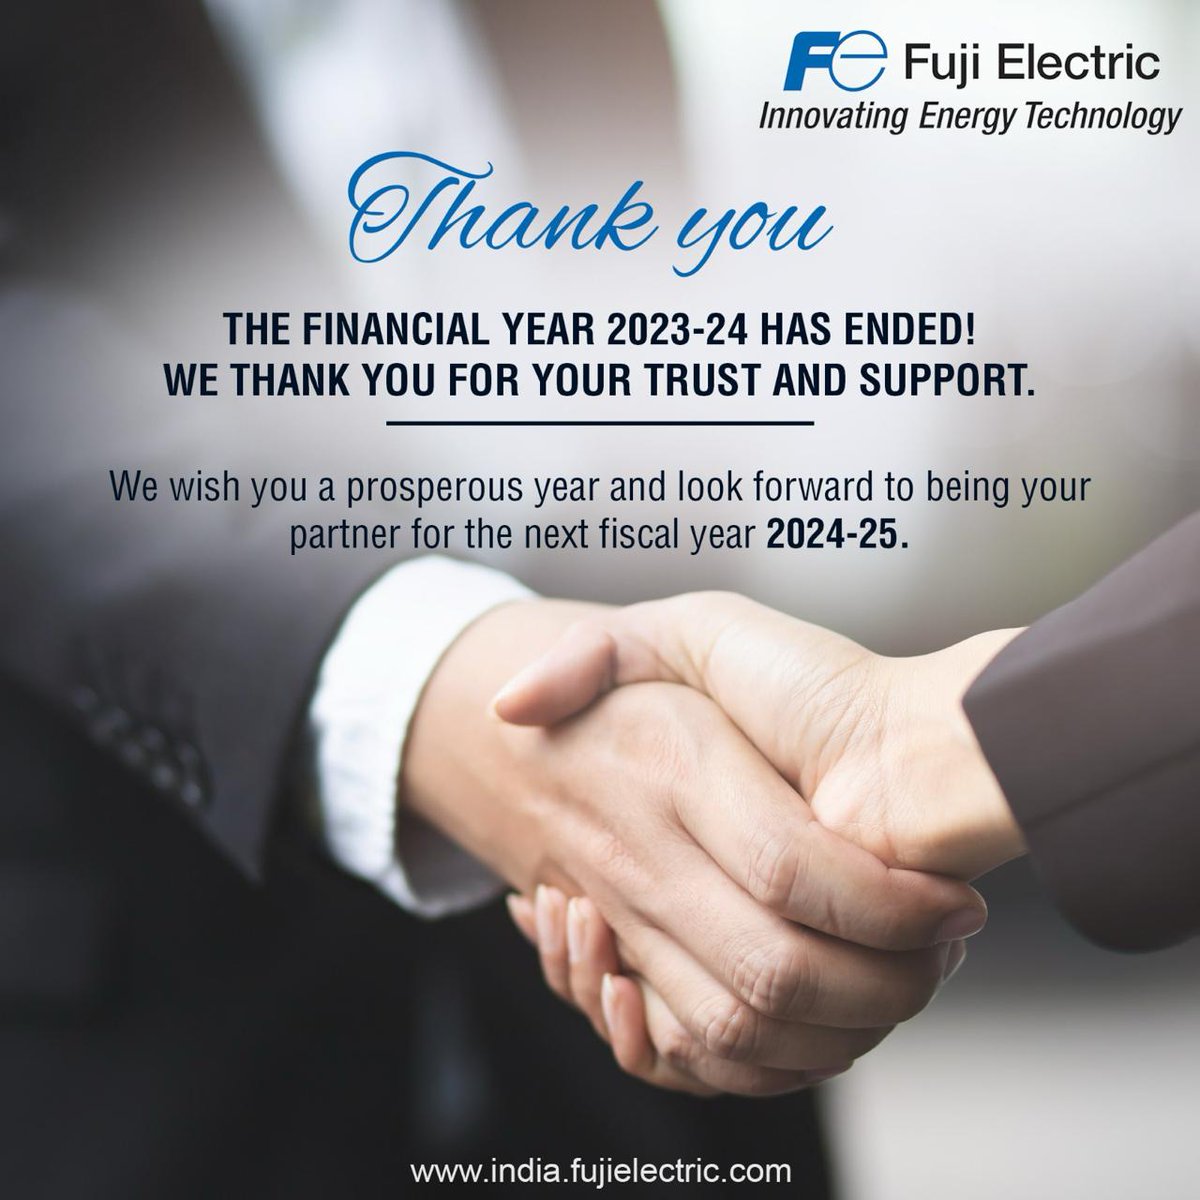 Happy New Financial Year! Thank you for your trust & support during 2023-24. We're excited about strengthening our partnership in 2024-25 for a year of predictability, profitability, & sustainability!
#Fujielectric #Fujielectricindia #Newfinancialyear #Partnership #Successahead